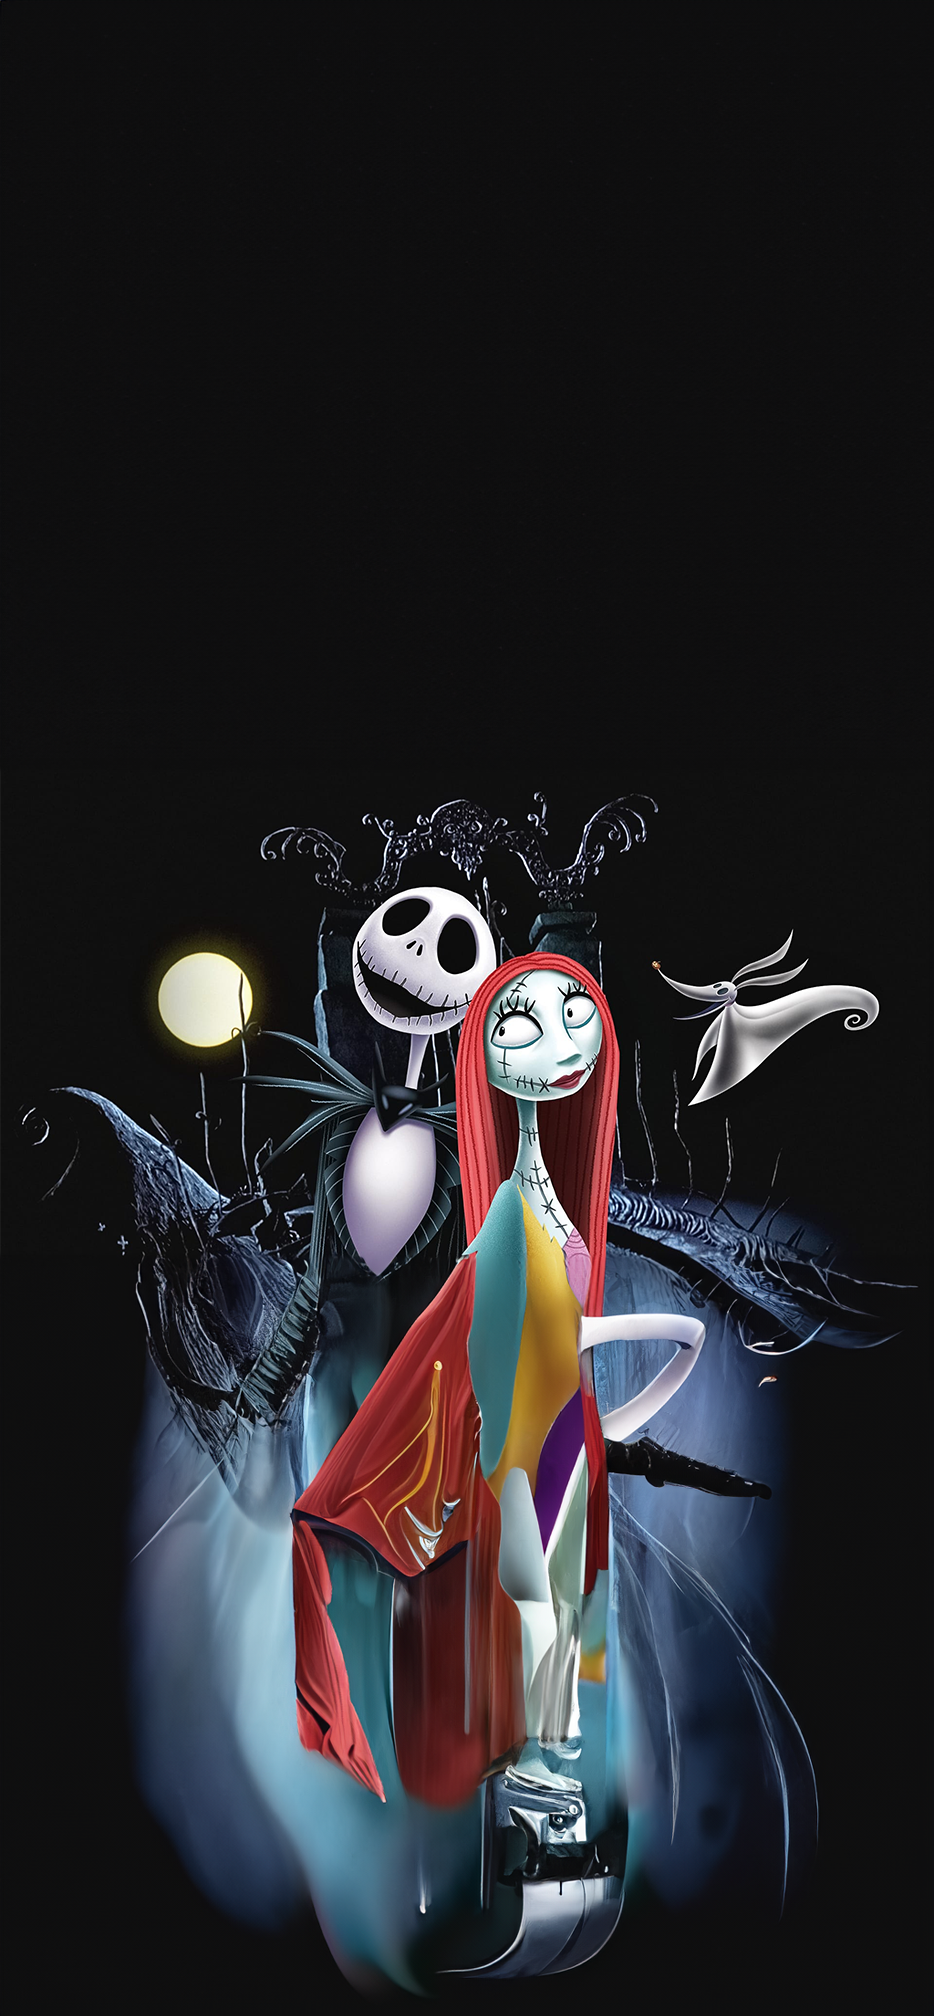 Jack and Sally The Nightmare Before Christmas Front Door Cover Banner Wrap